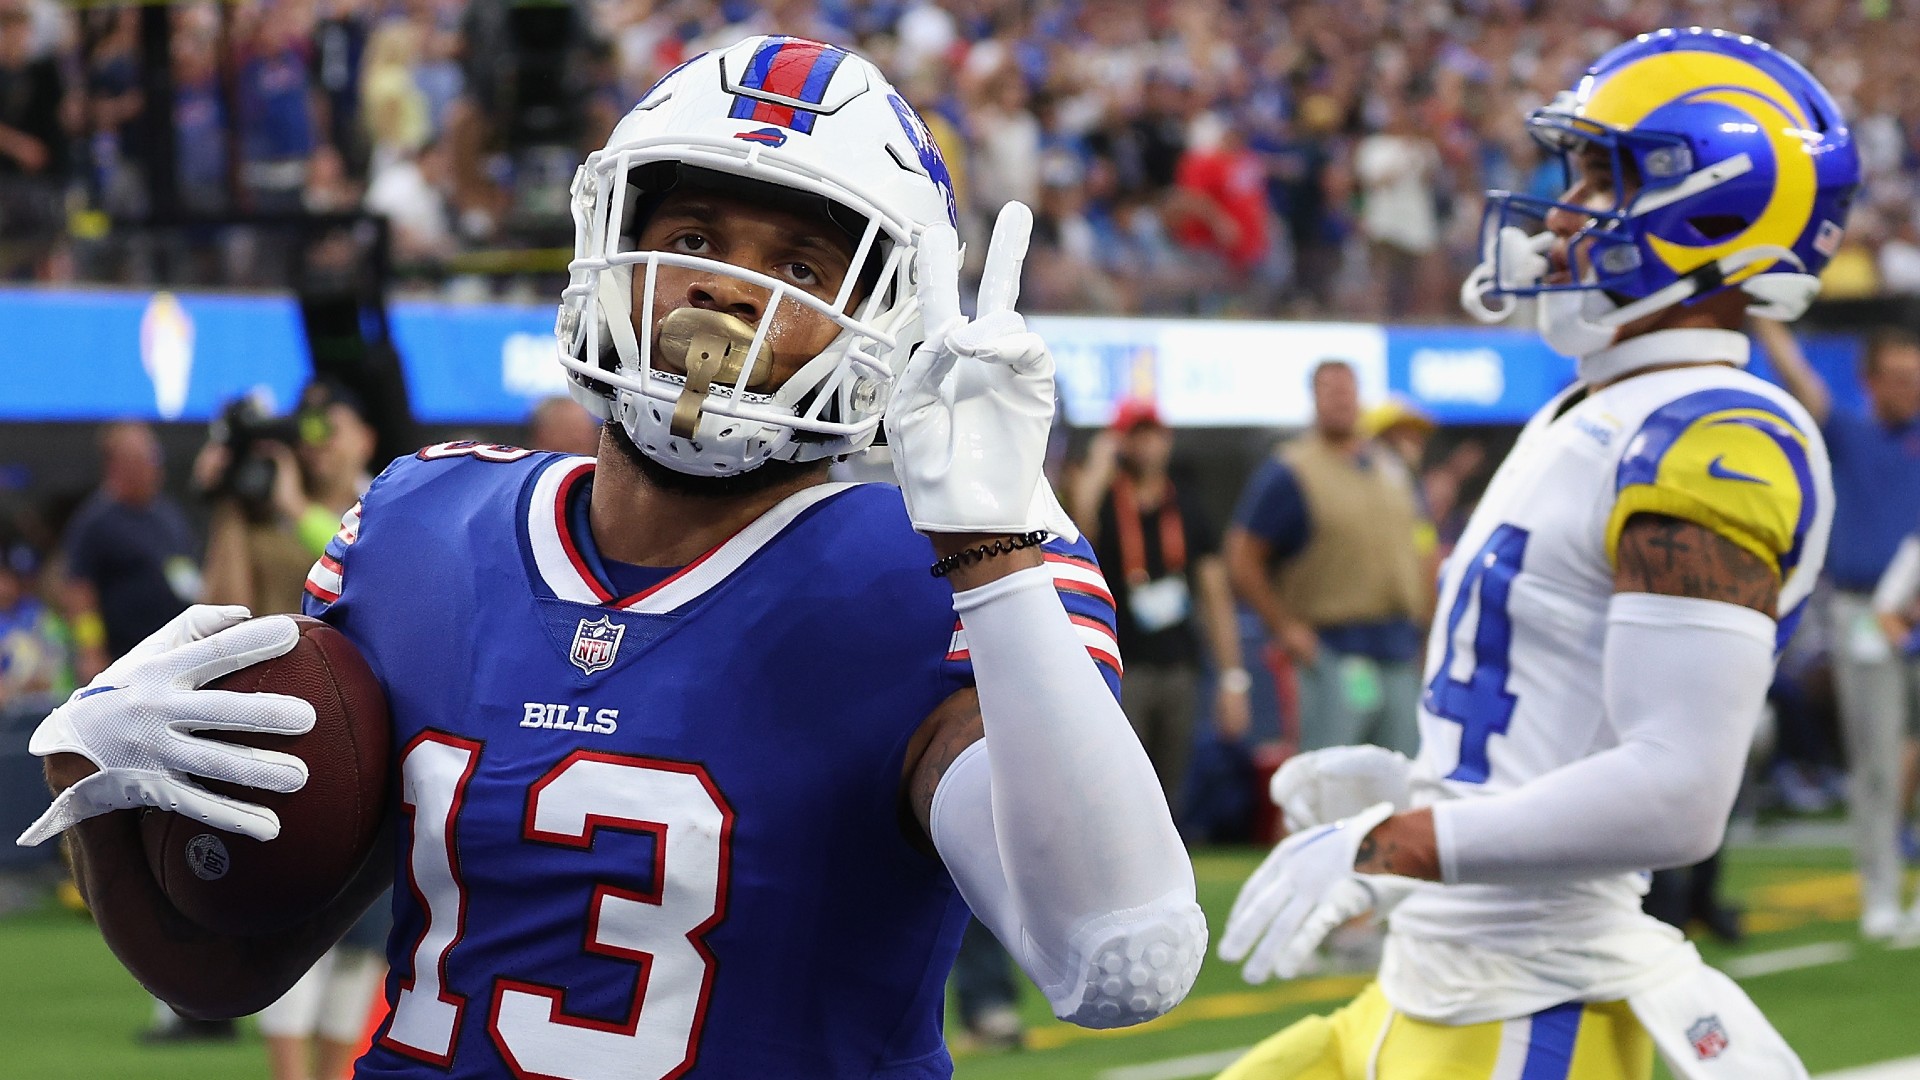 Buffalo Bills vs. Chicago Bears: Date, kick-off time, stream info and how to watch the NFL on DAZN